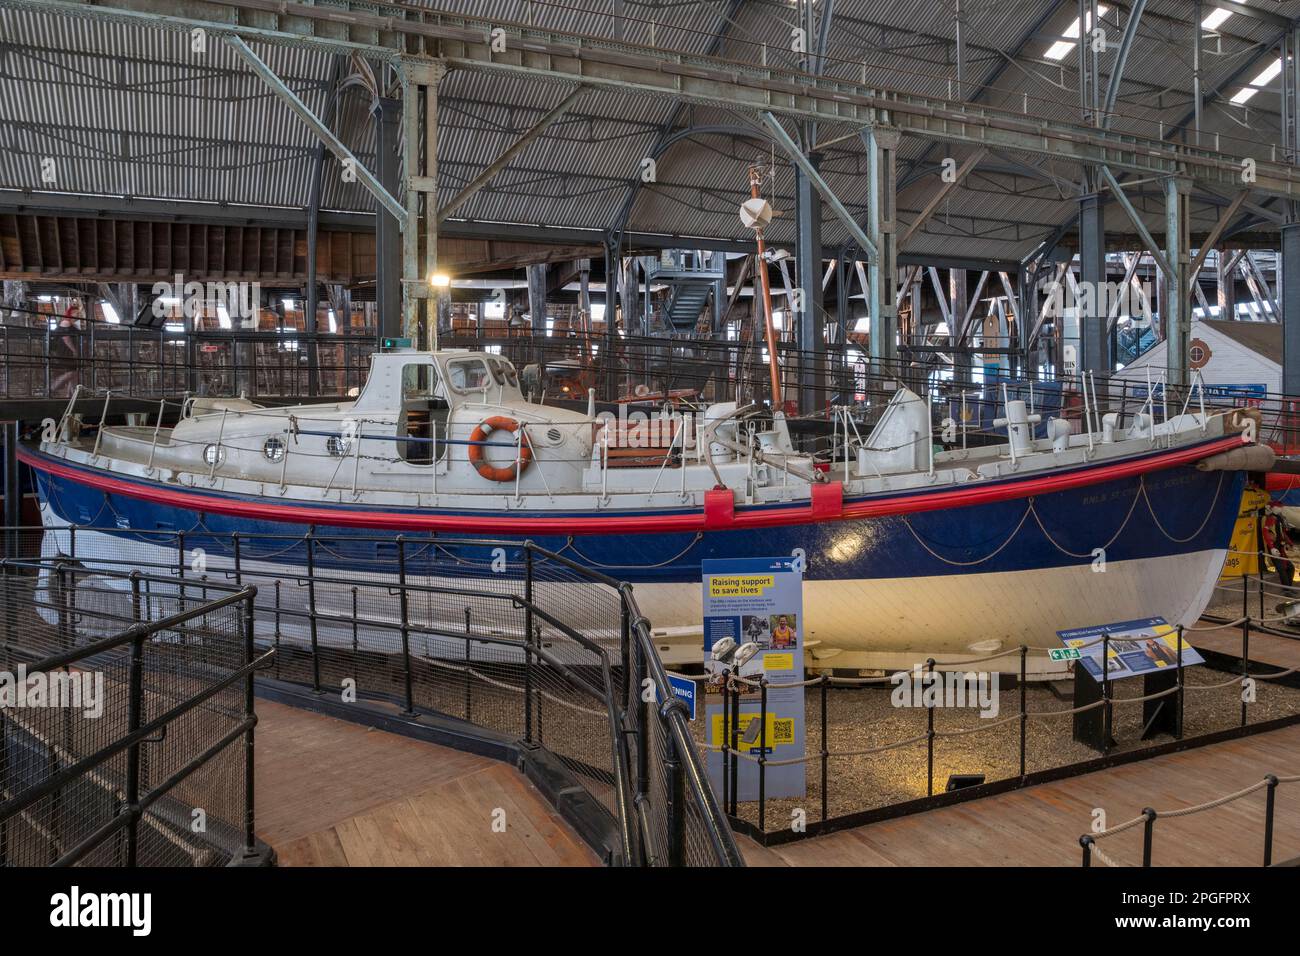 The St Cybi, a Barnett class lifeboat in the RNLI Historic Lifeboat Collection, Historic Dockyard Chatham, Kent, UK. Stock Photo